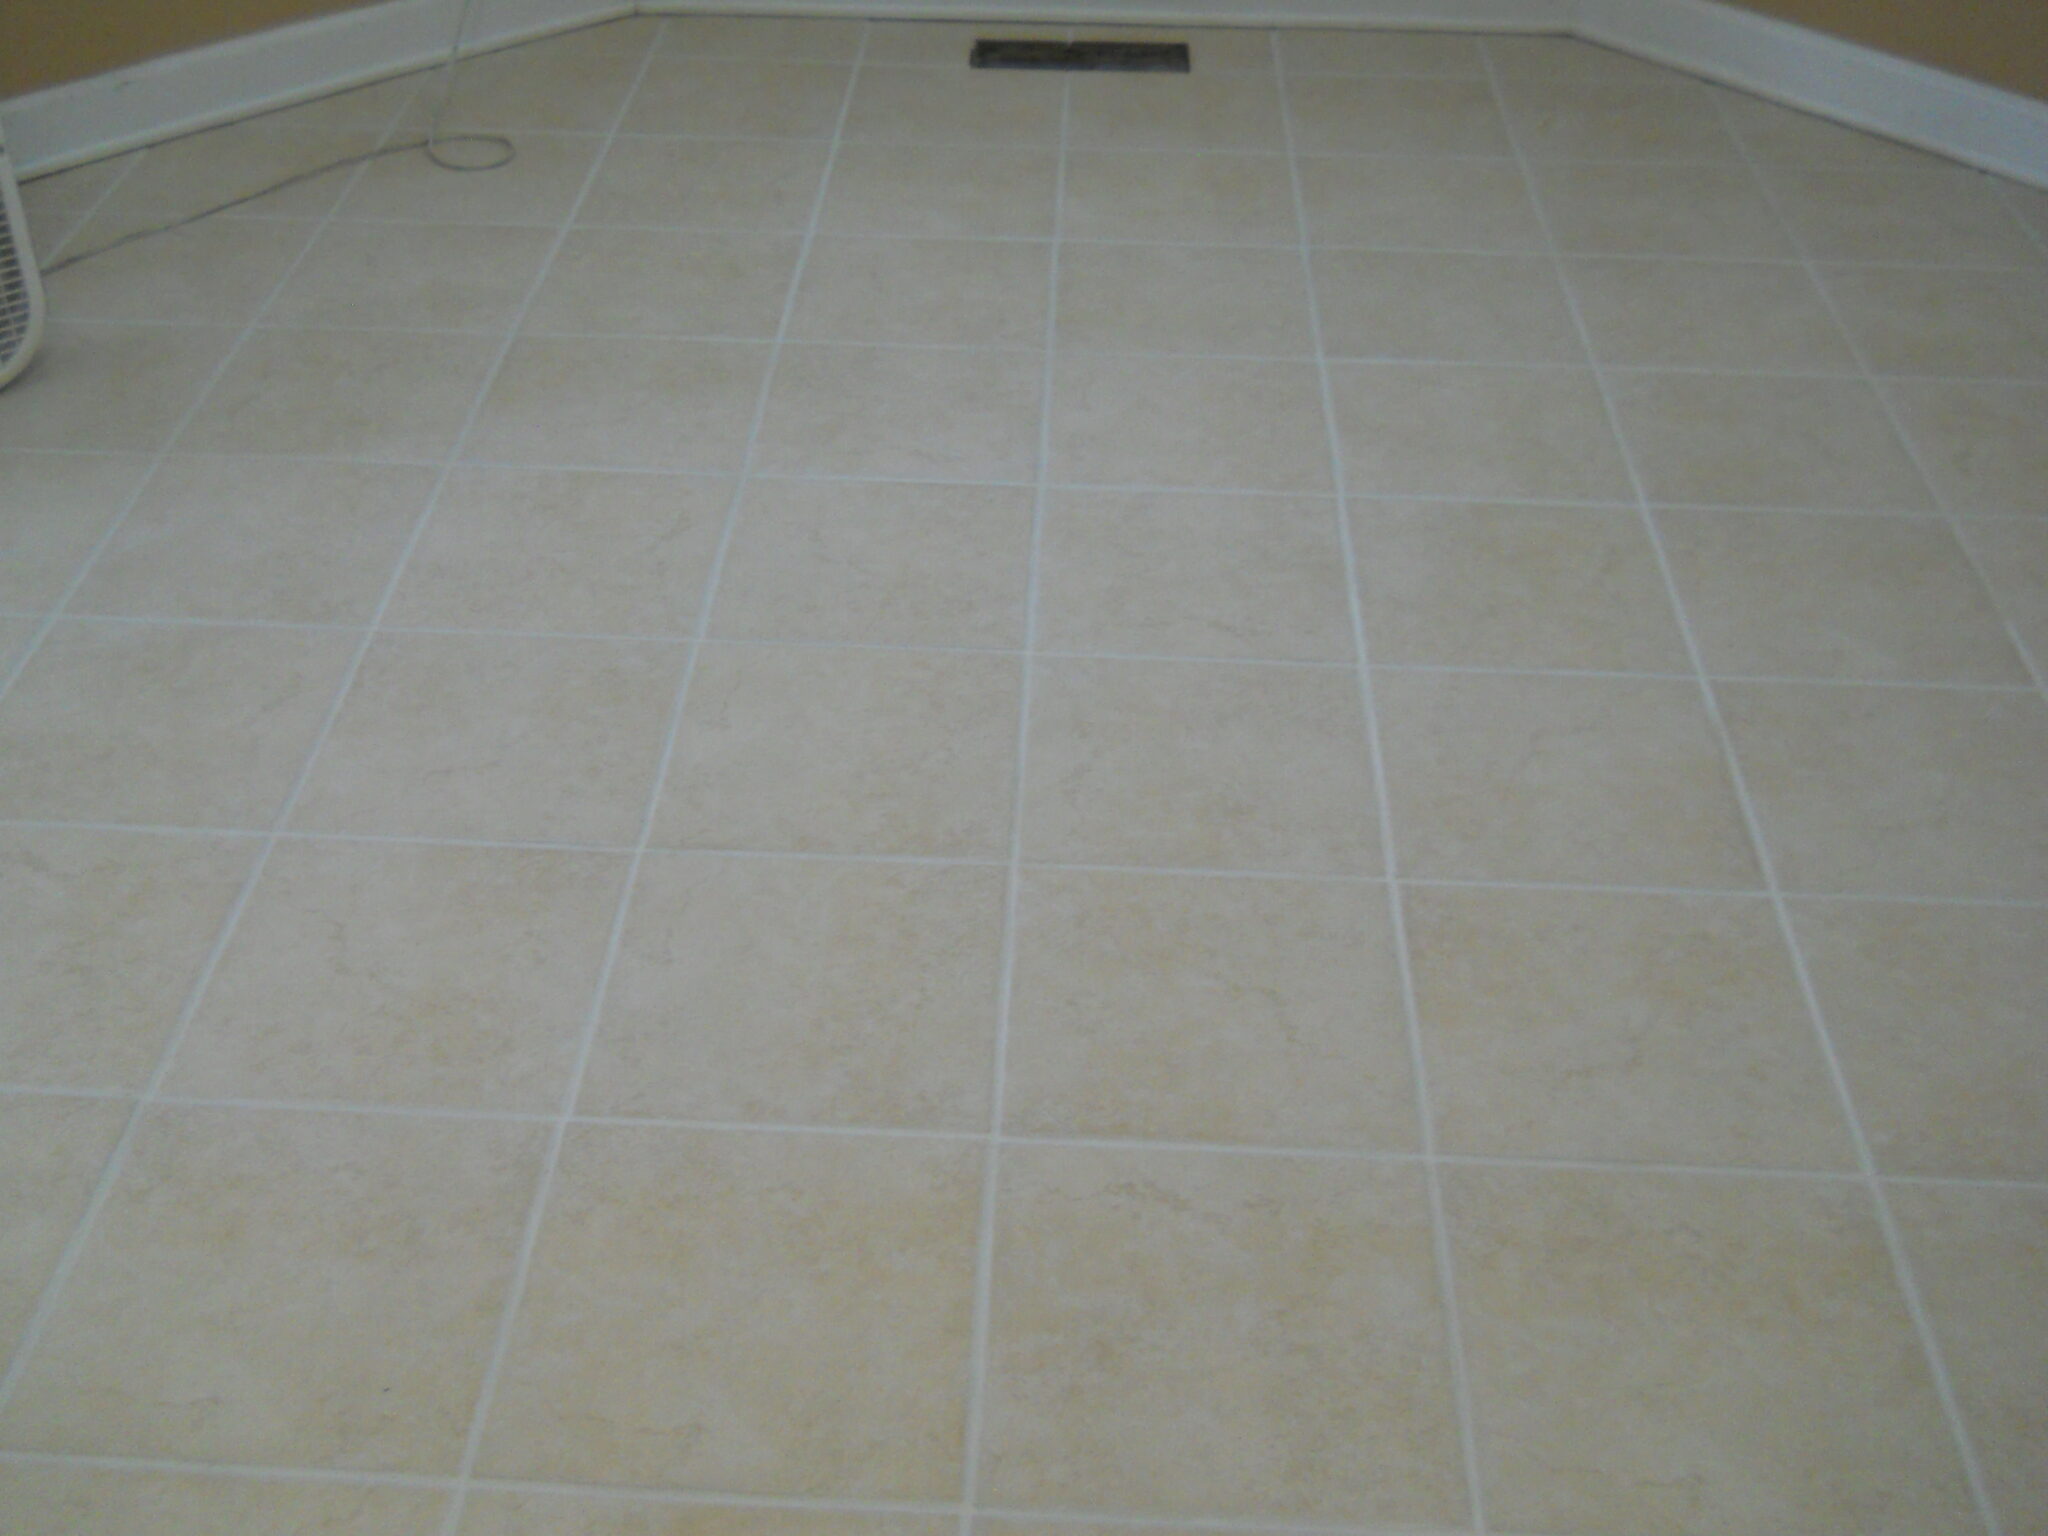 Tile floor after professional steam cleaning. Perfect white grout.